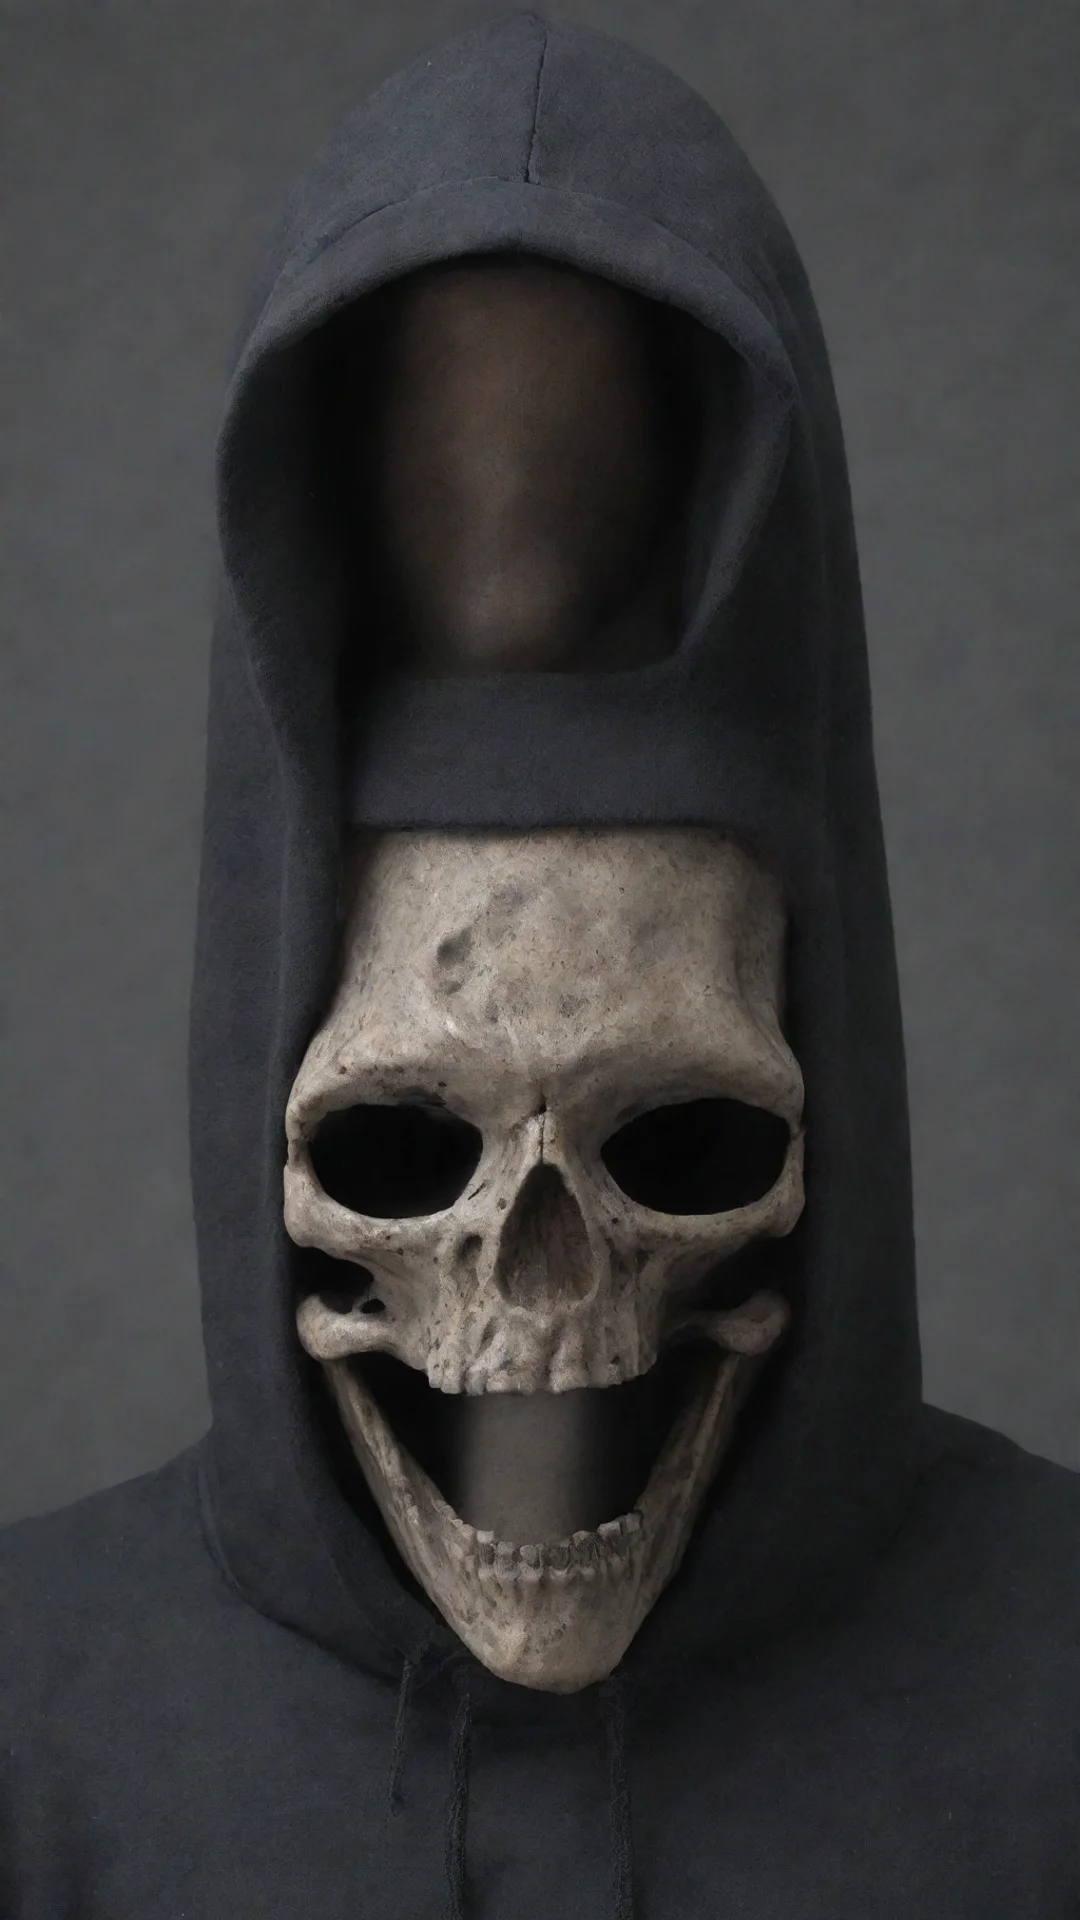 aiamazing skull mask with hoodie awesome portrait 2 tall